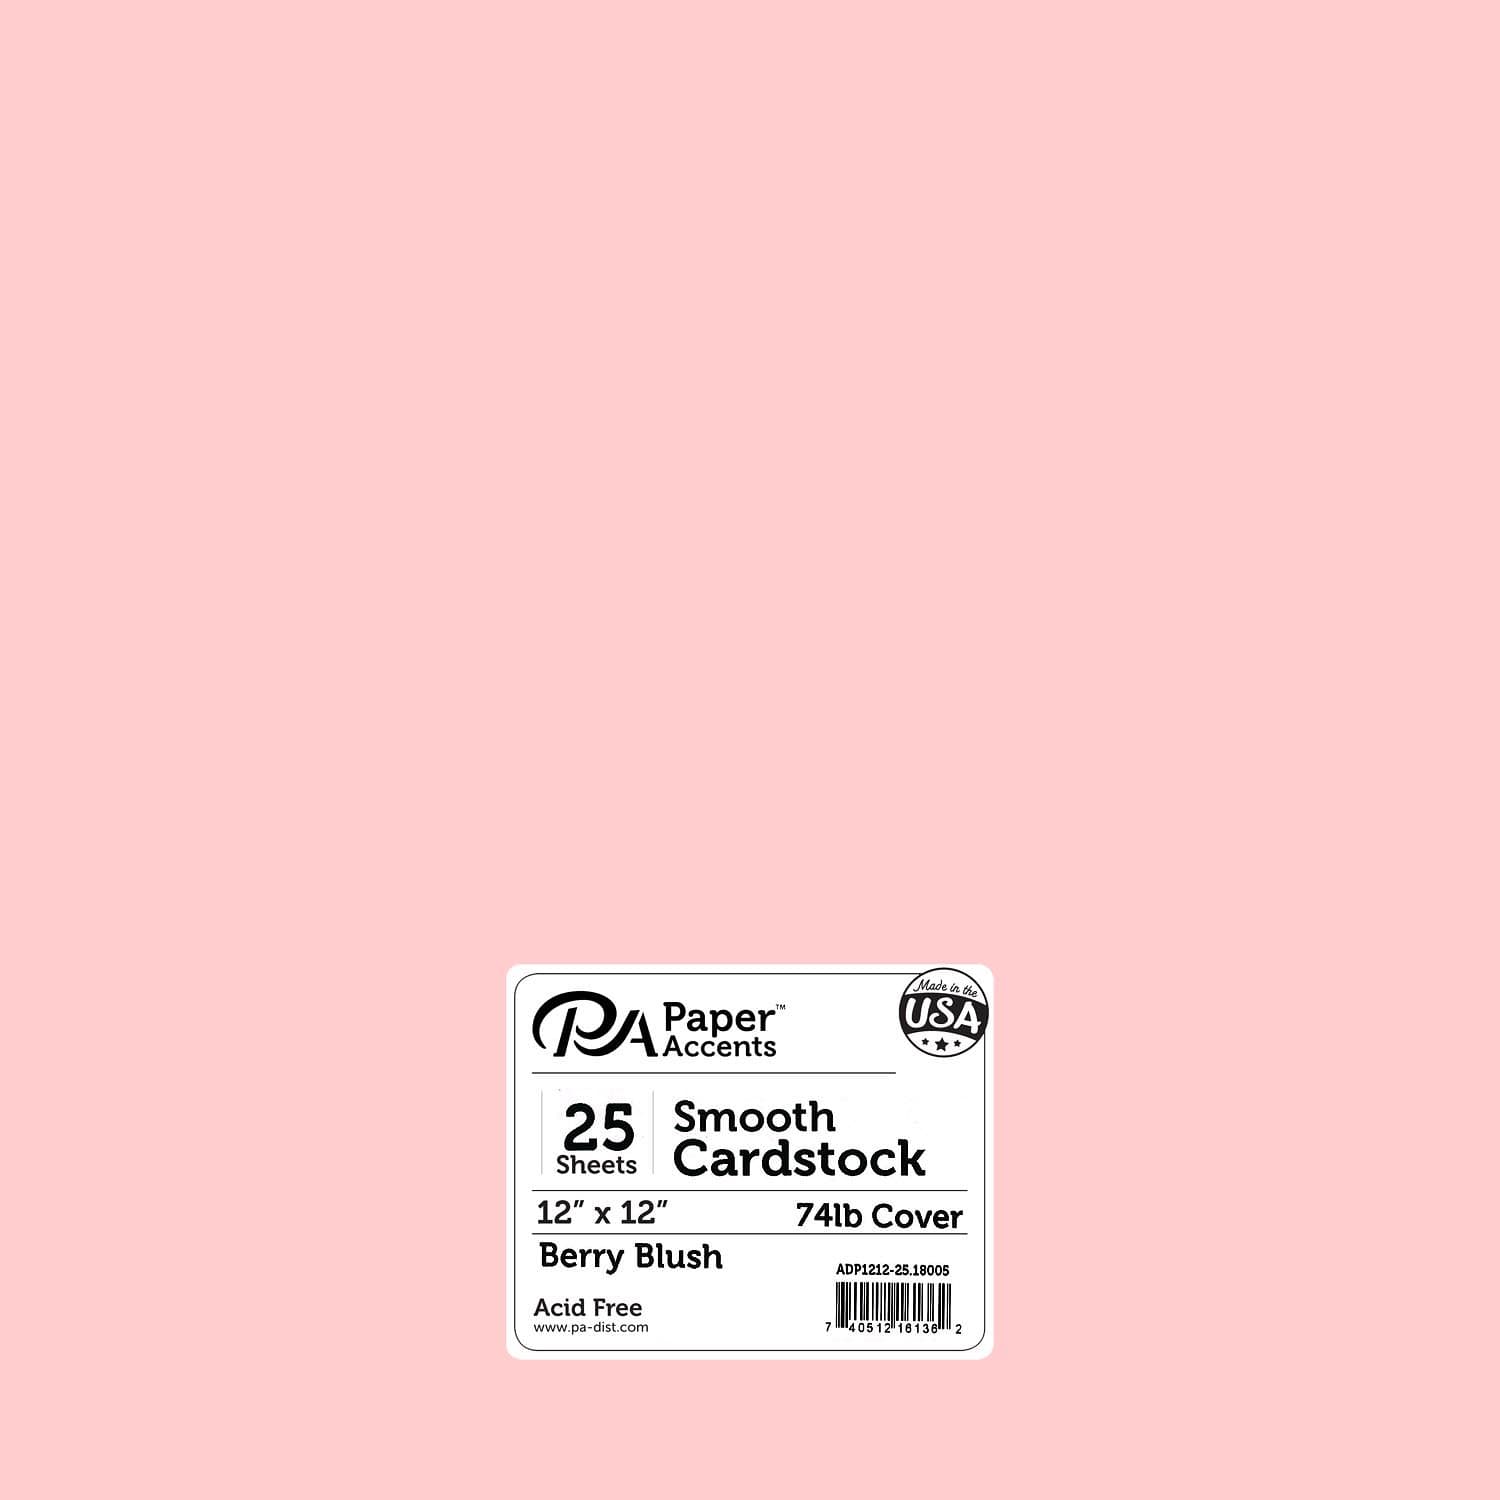 PA Paper™ Accents 12 x 12 Smooth Cardstock Paper, 25 Sheets